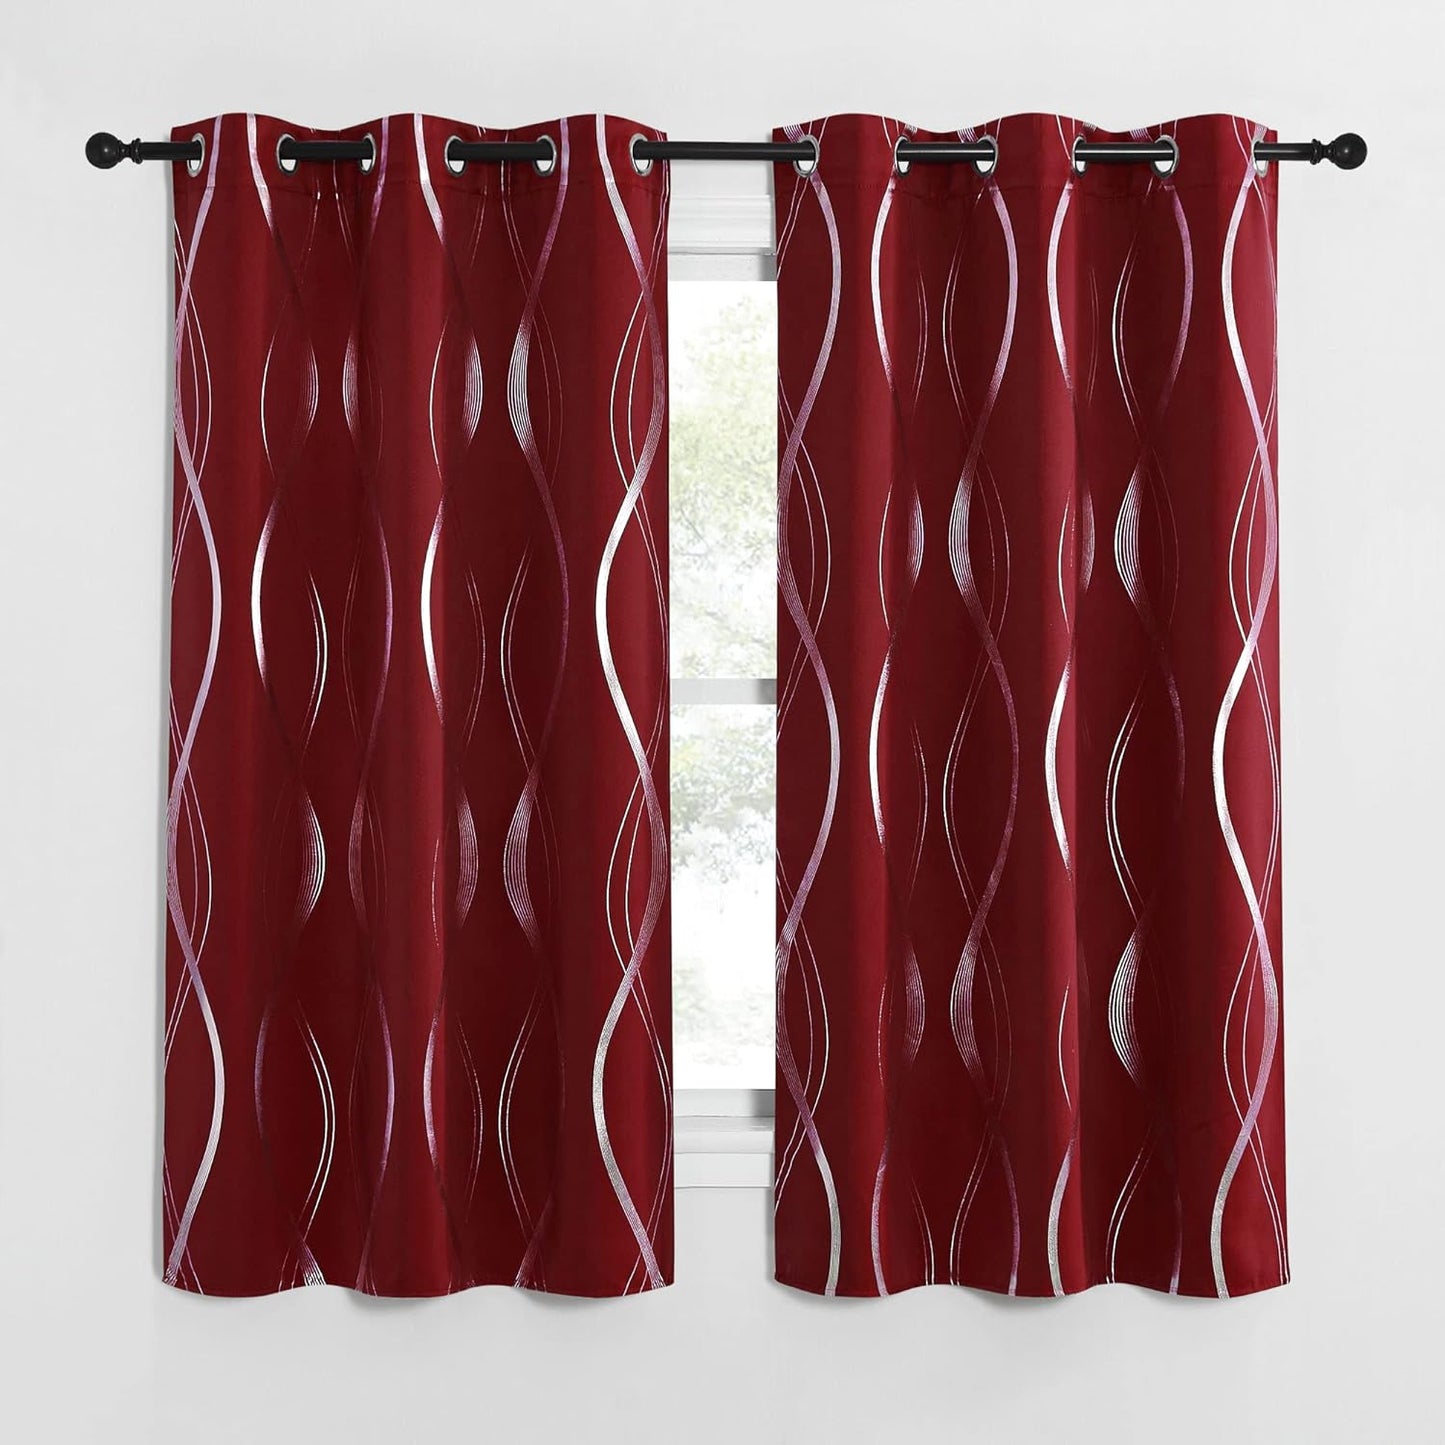 NICETOWN Grey Blackout Curtains 84 Inch Length 2 Panels Set for Bedroom/Living Room, Noise Reducing Thermal Insulated Wave Line Foil Print Drapes for Patio Sliding Glass Door (52 X 84, Gray)  NICETOWN Burgundy Red 42"W X 63"L 